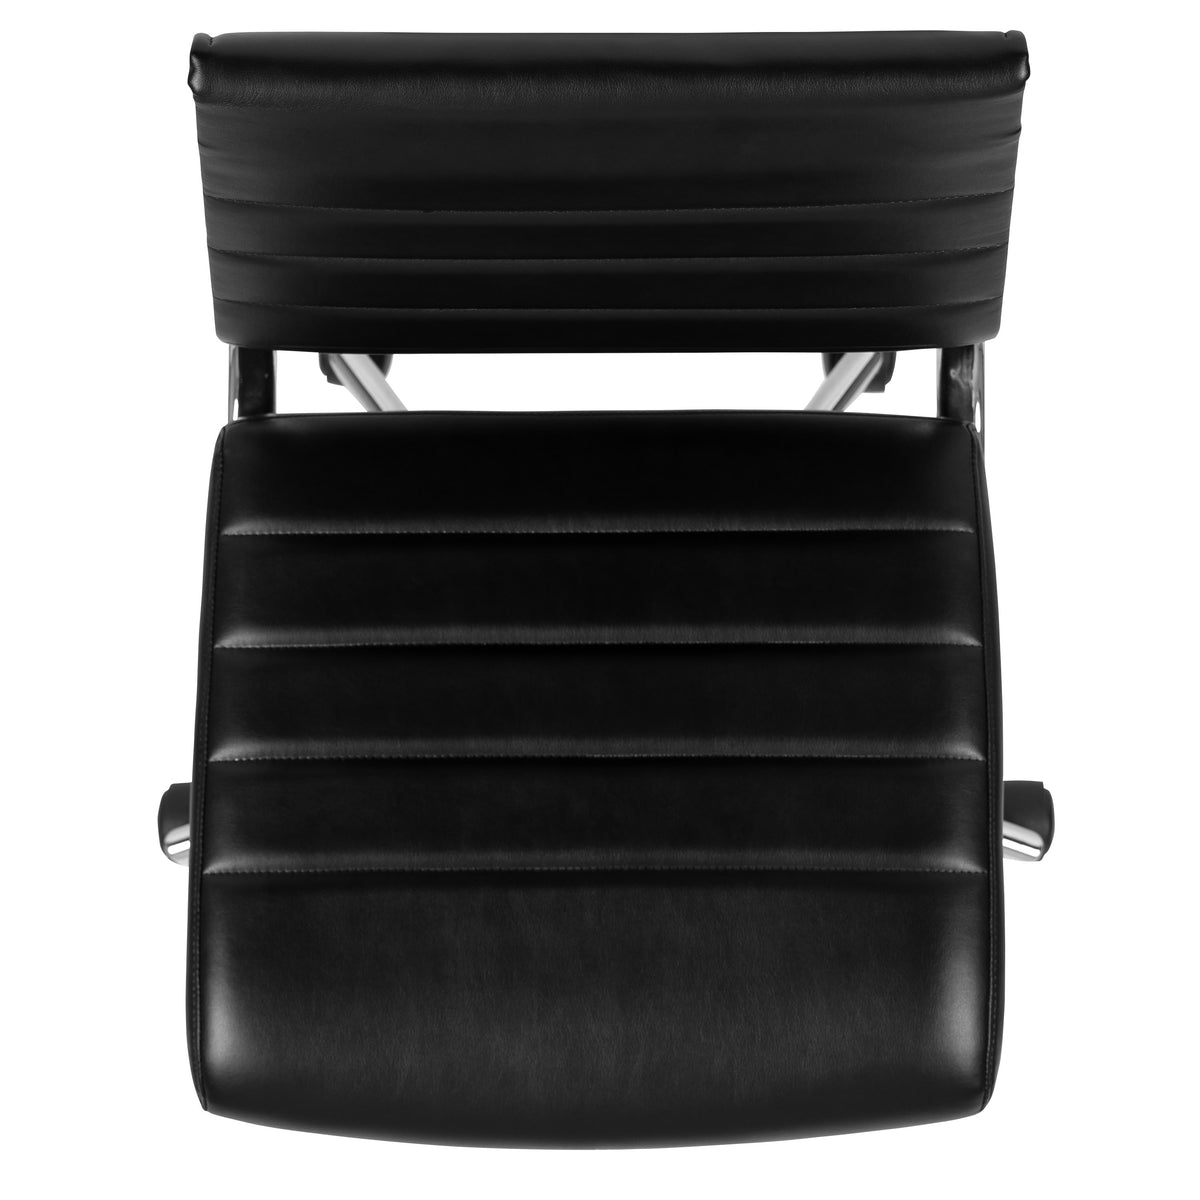 Black |#| Mid-Back Armless Black LeatherSoft Ribbed Executive Swivel Office Chair